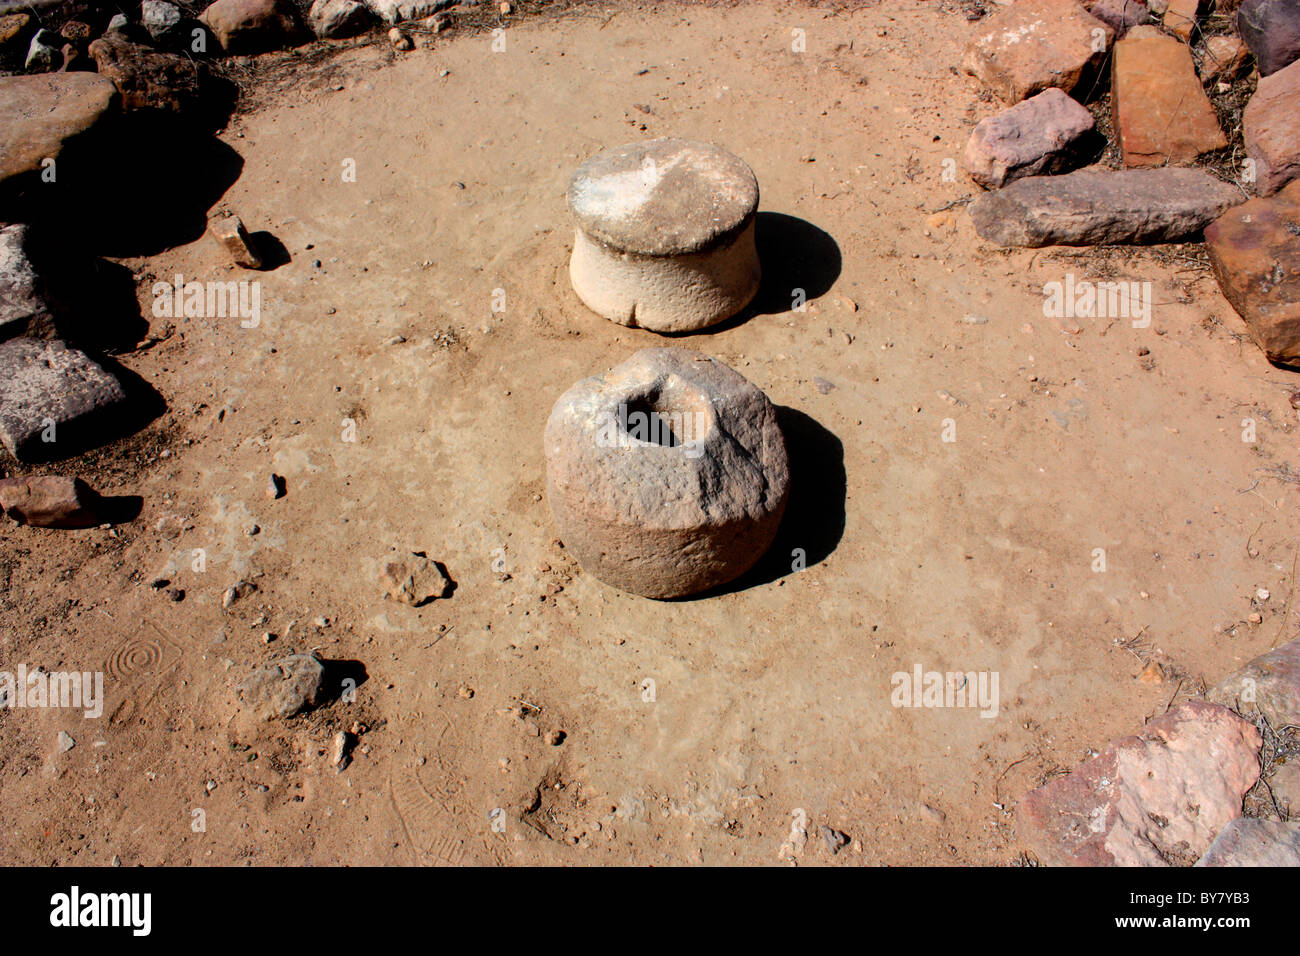 Manual grinder found at Excavated ruins of Harrappa civilisation at Dholavira, anicient site of Indus valley civilisation, india Stock Photo